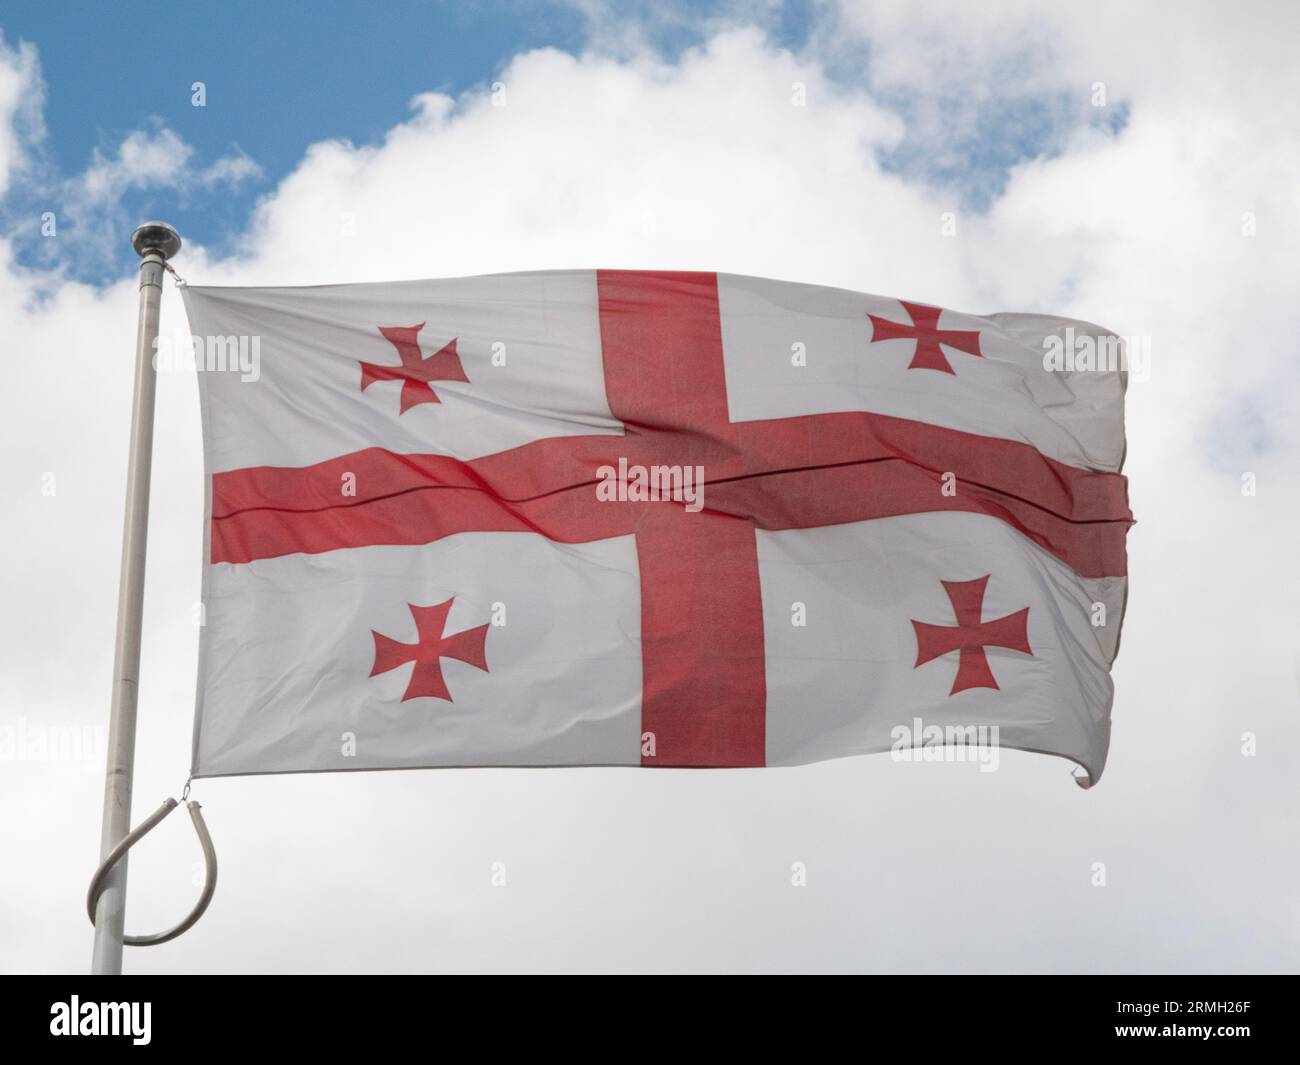 The flag of Georgia, also known as the five-cross flag, is one of the national symbols of Georgia waving in the wind from a flagpole. Stock Photo